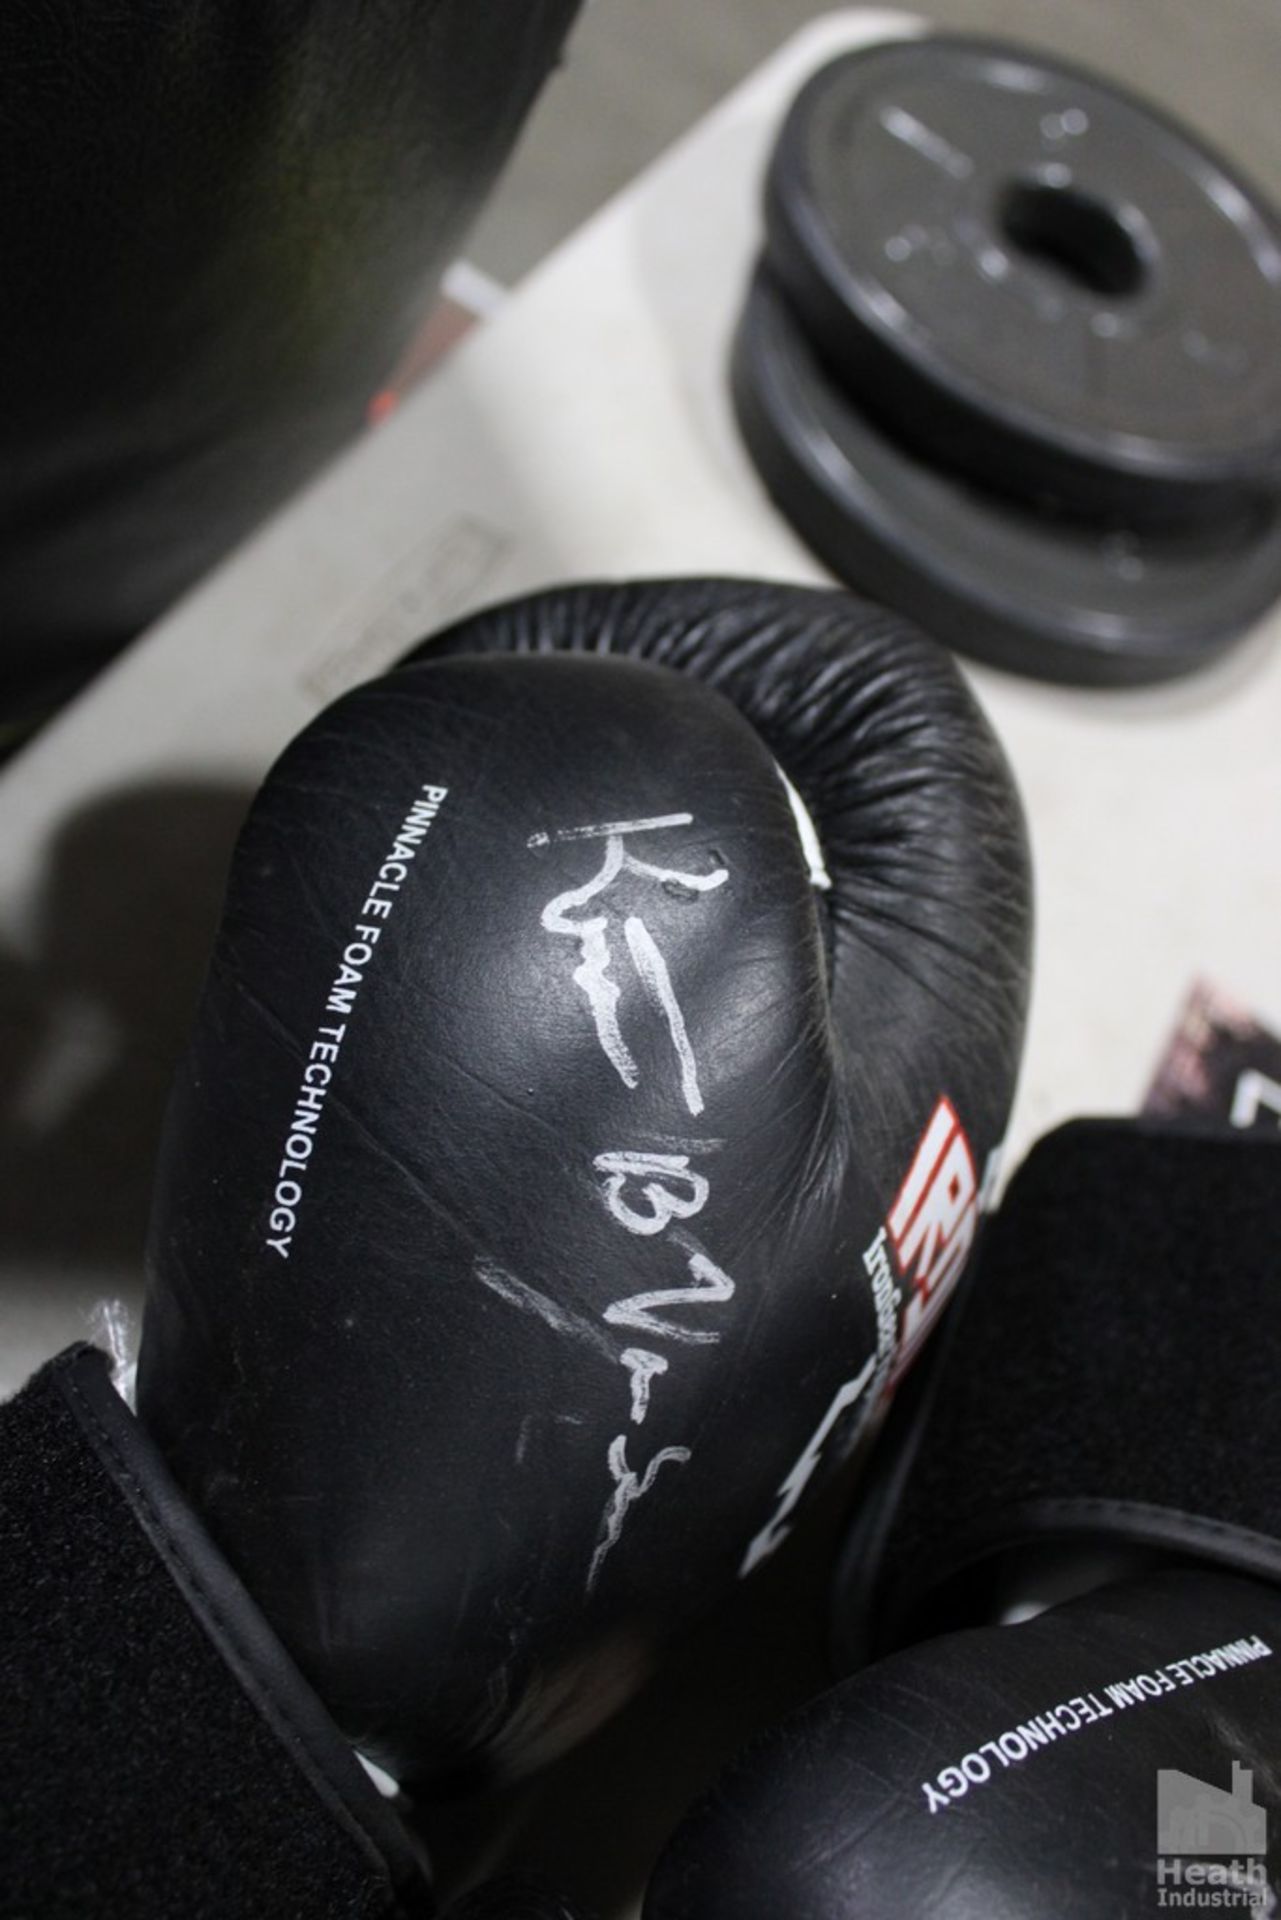 IRON GEAR BOXING GLOVES, APPEAR TO HAVE AN AUTOGRAPH ON THEM - Image 3 of 3